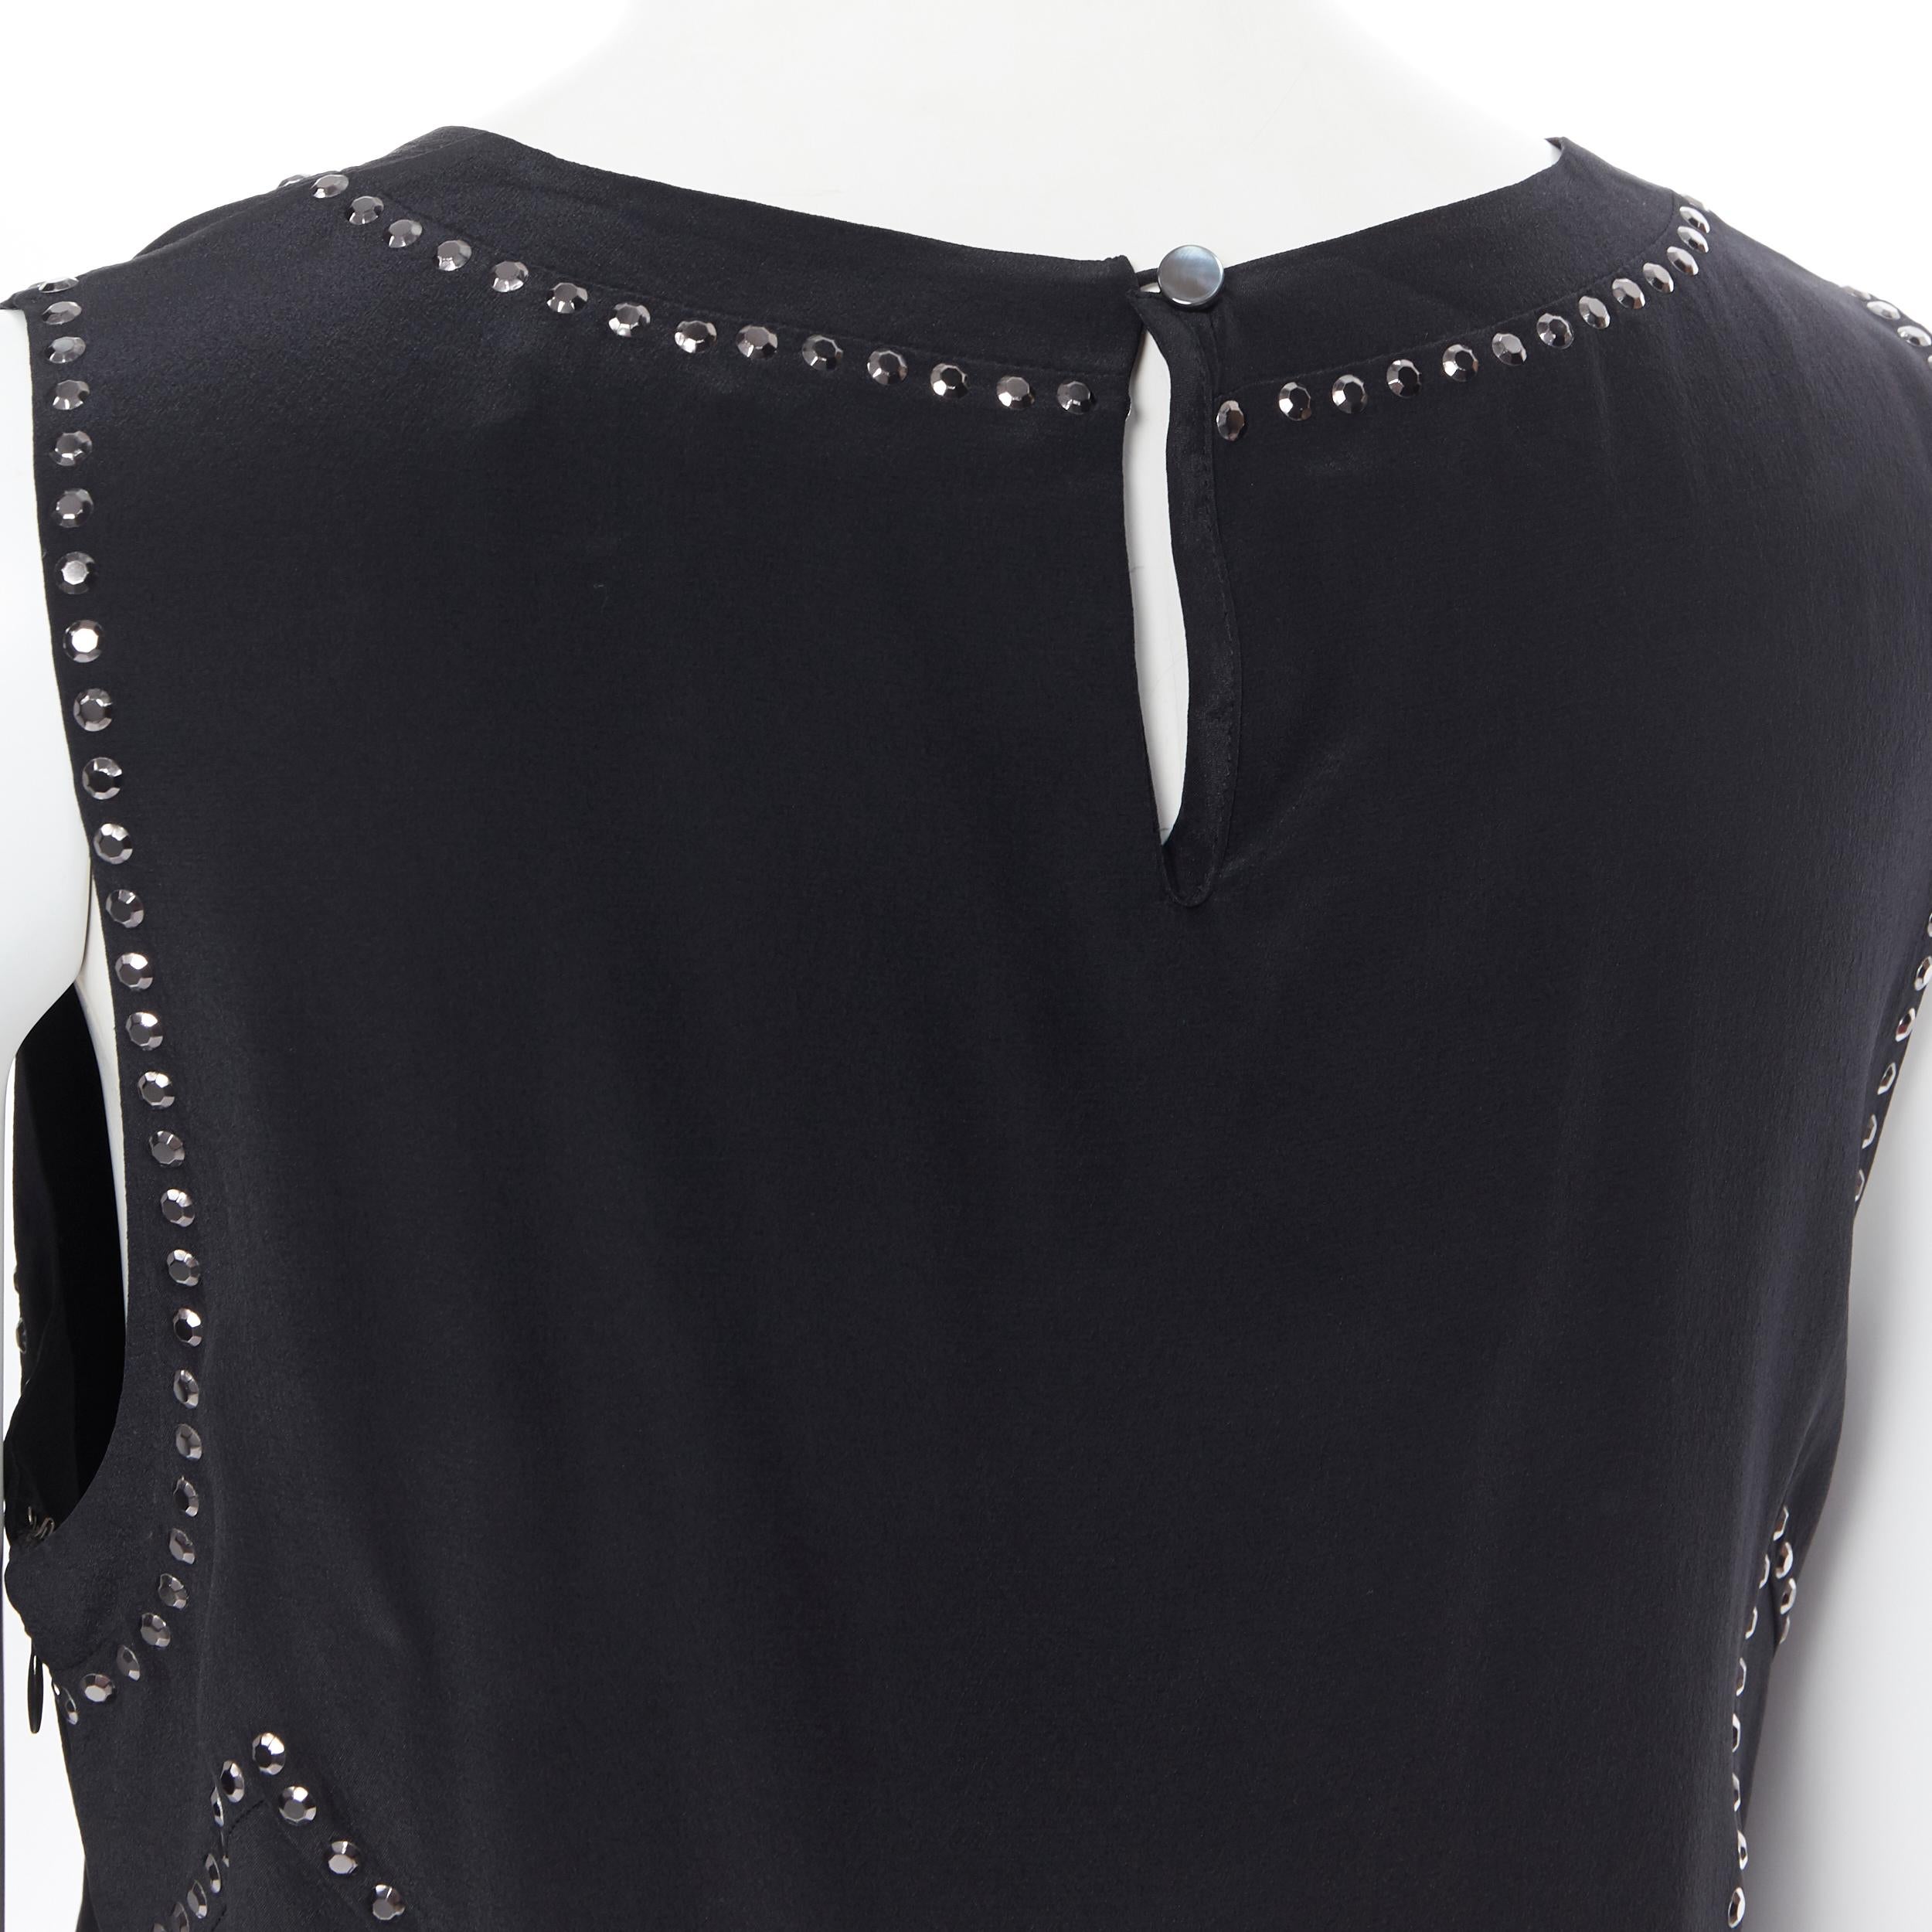 new MARC BY MARC JACOBS 100% black silk crystal embellished shell vest top S 2